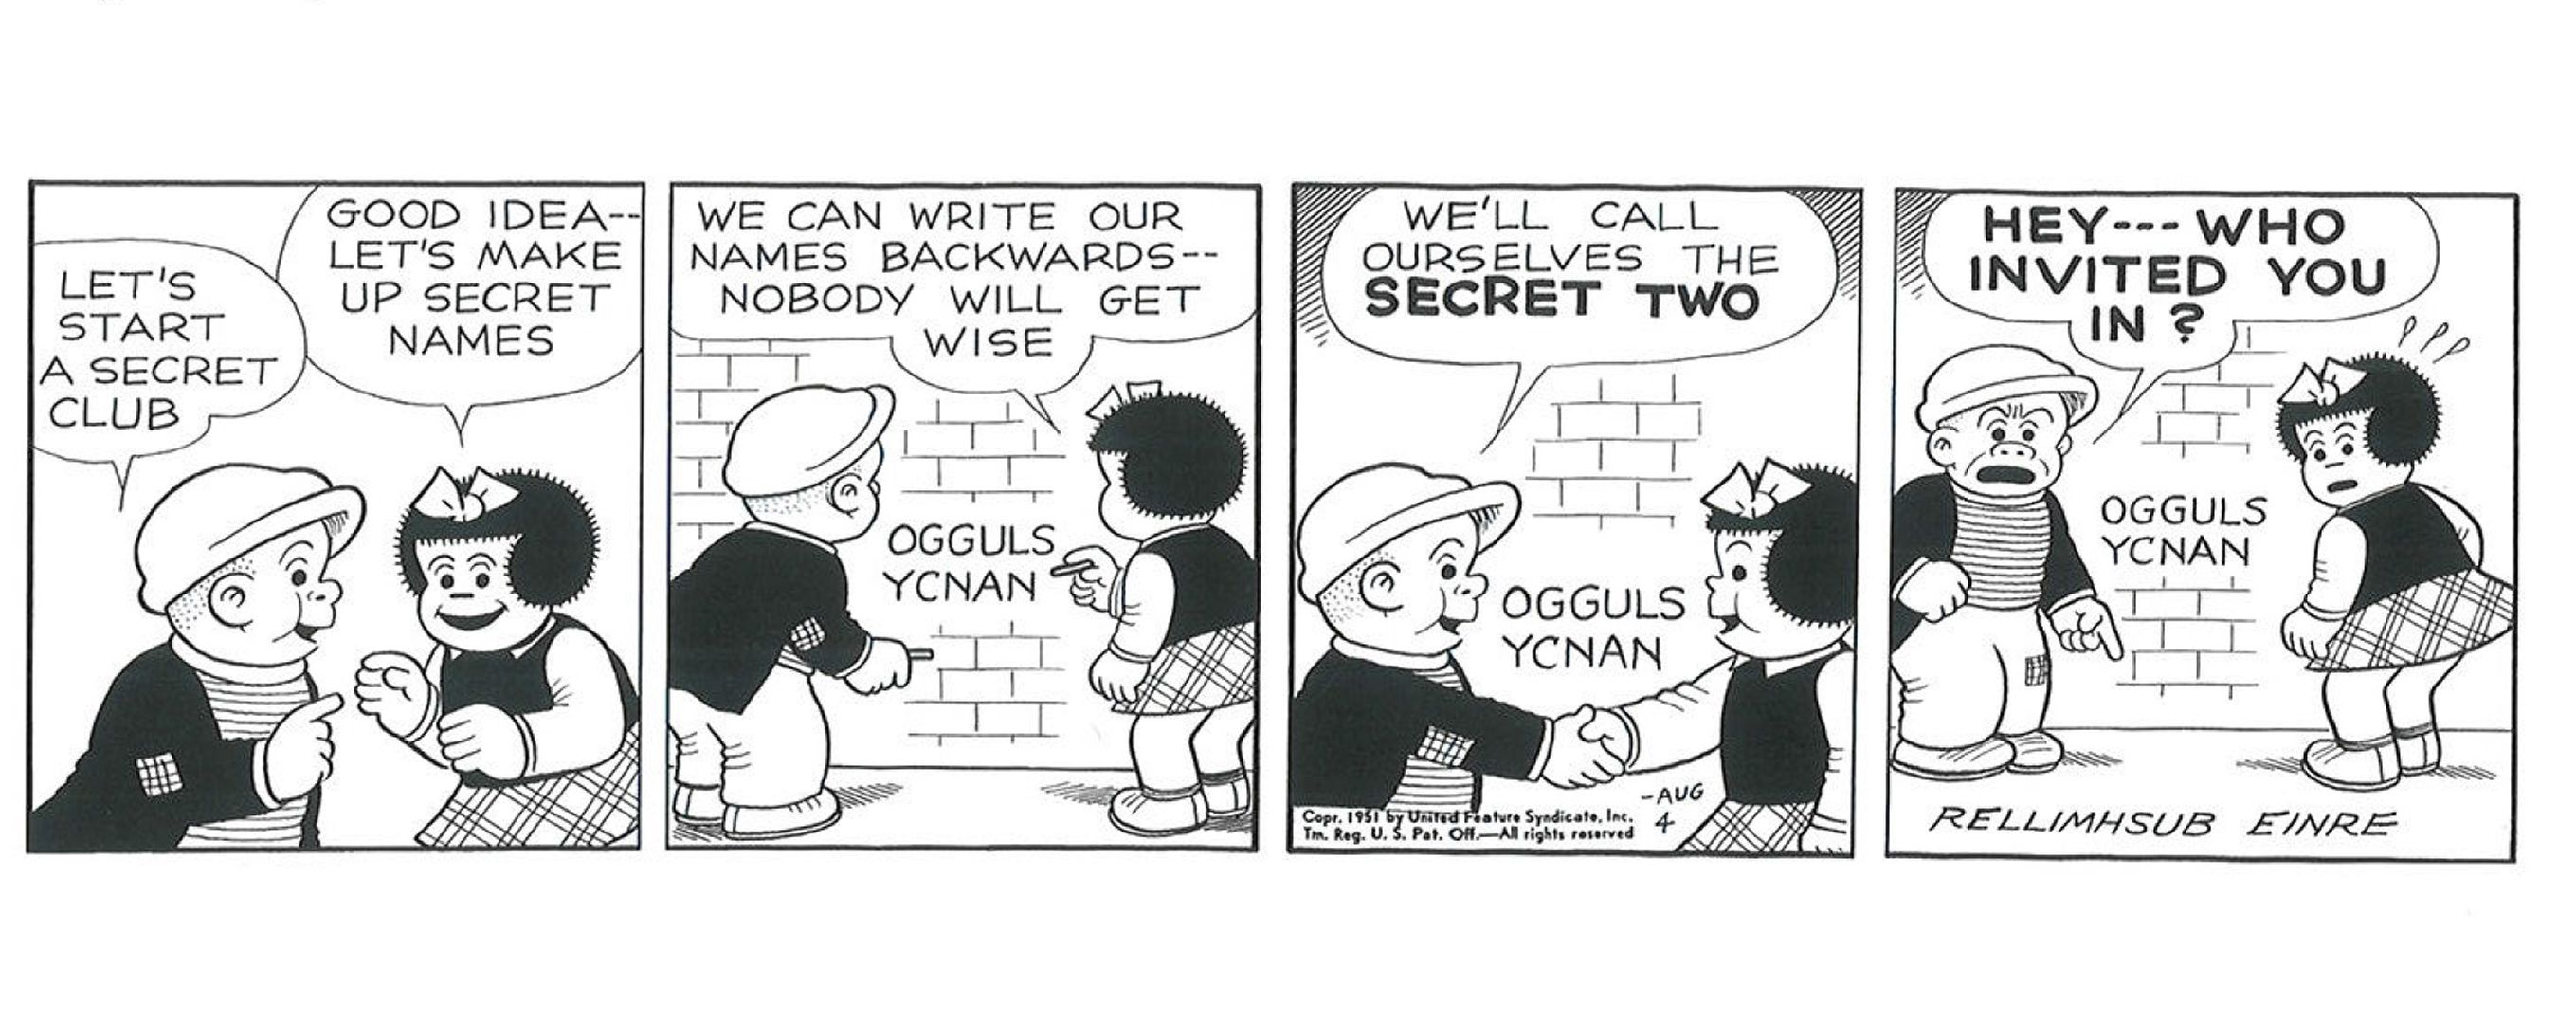 Nancy and Sluggo form a secret club, signing their names backward as a code. Unfortunately, creator Ernie Bushmiller has joined in with his signature in the final panel.